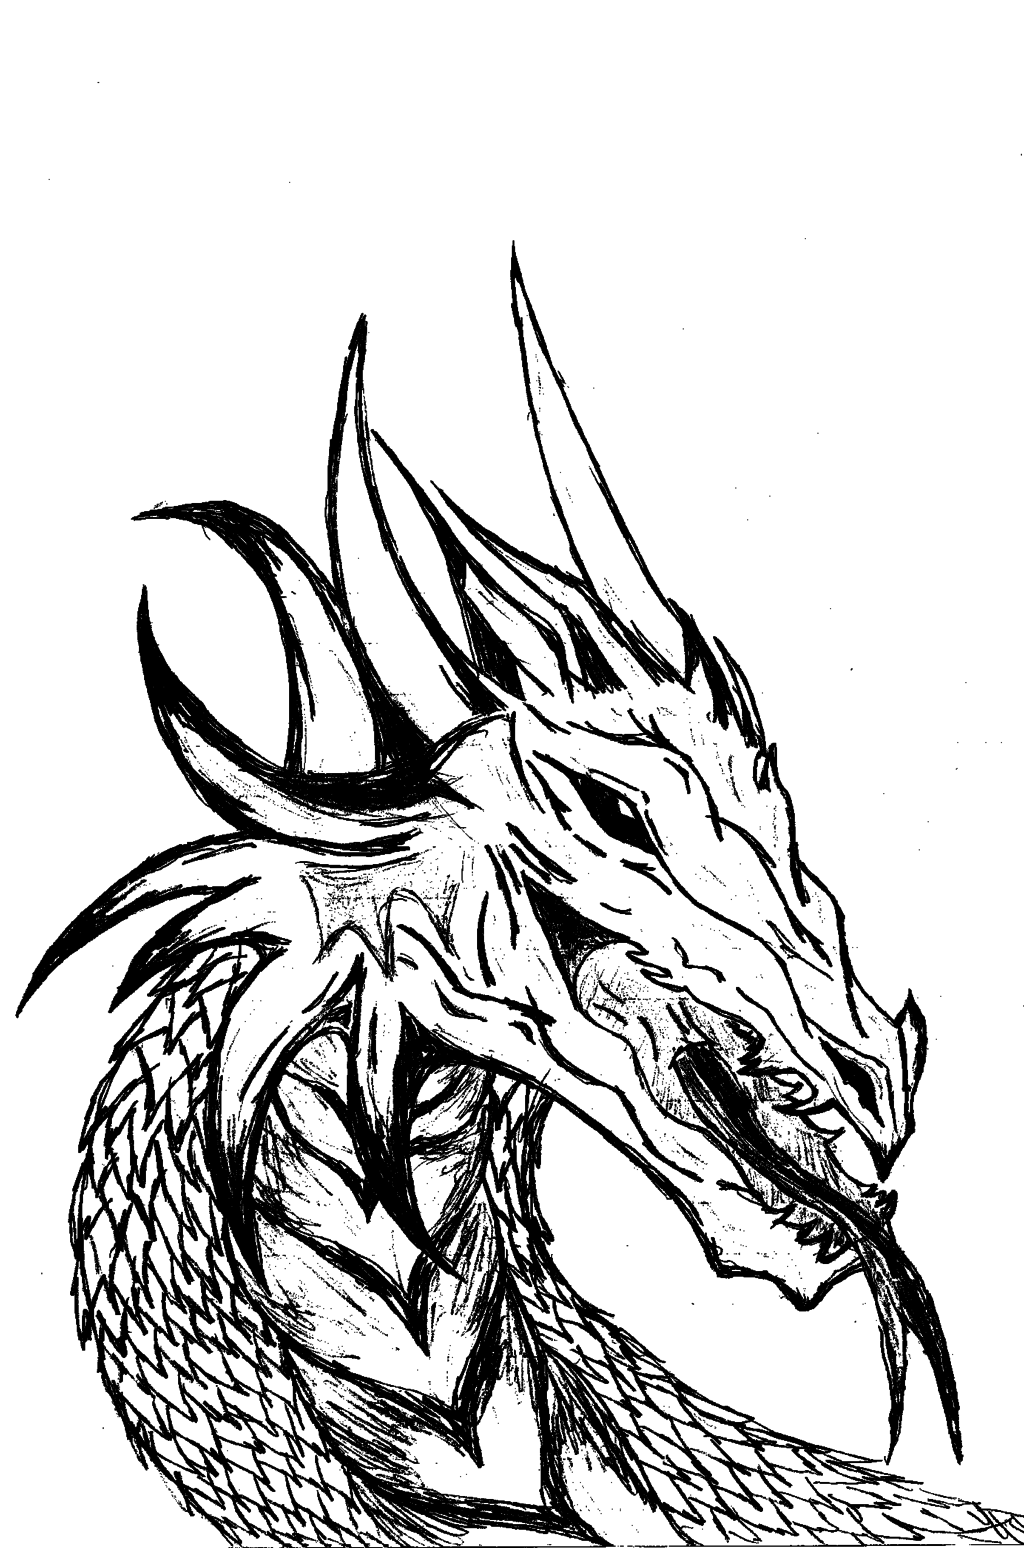 Dragon Head (black and white) by Bellep53 on DeviantArt